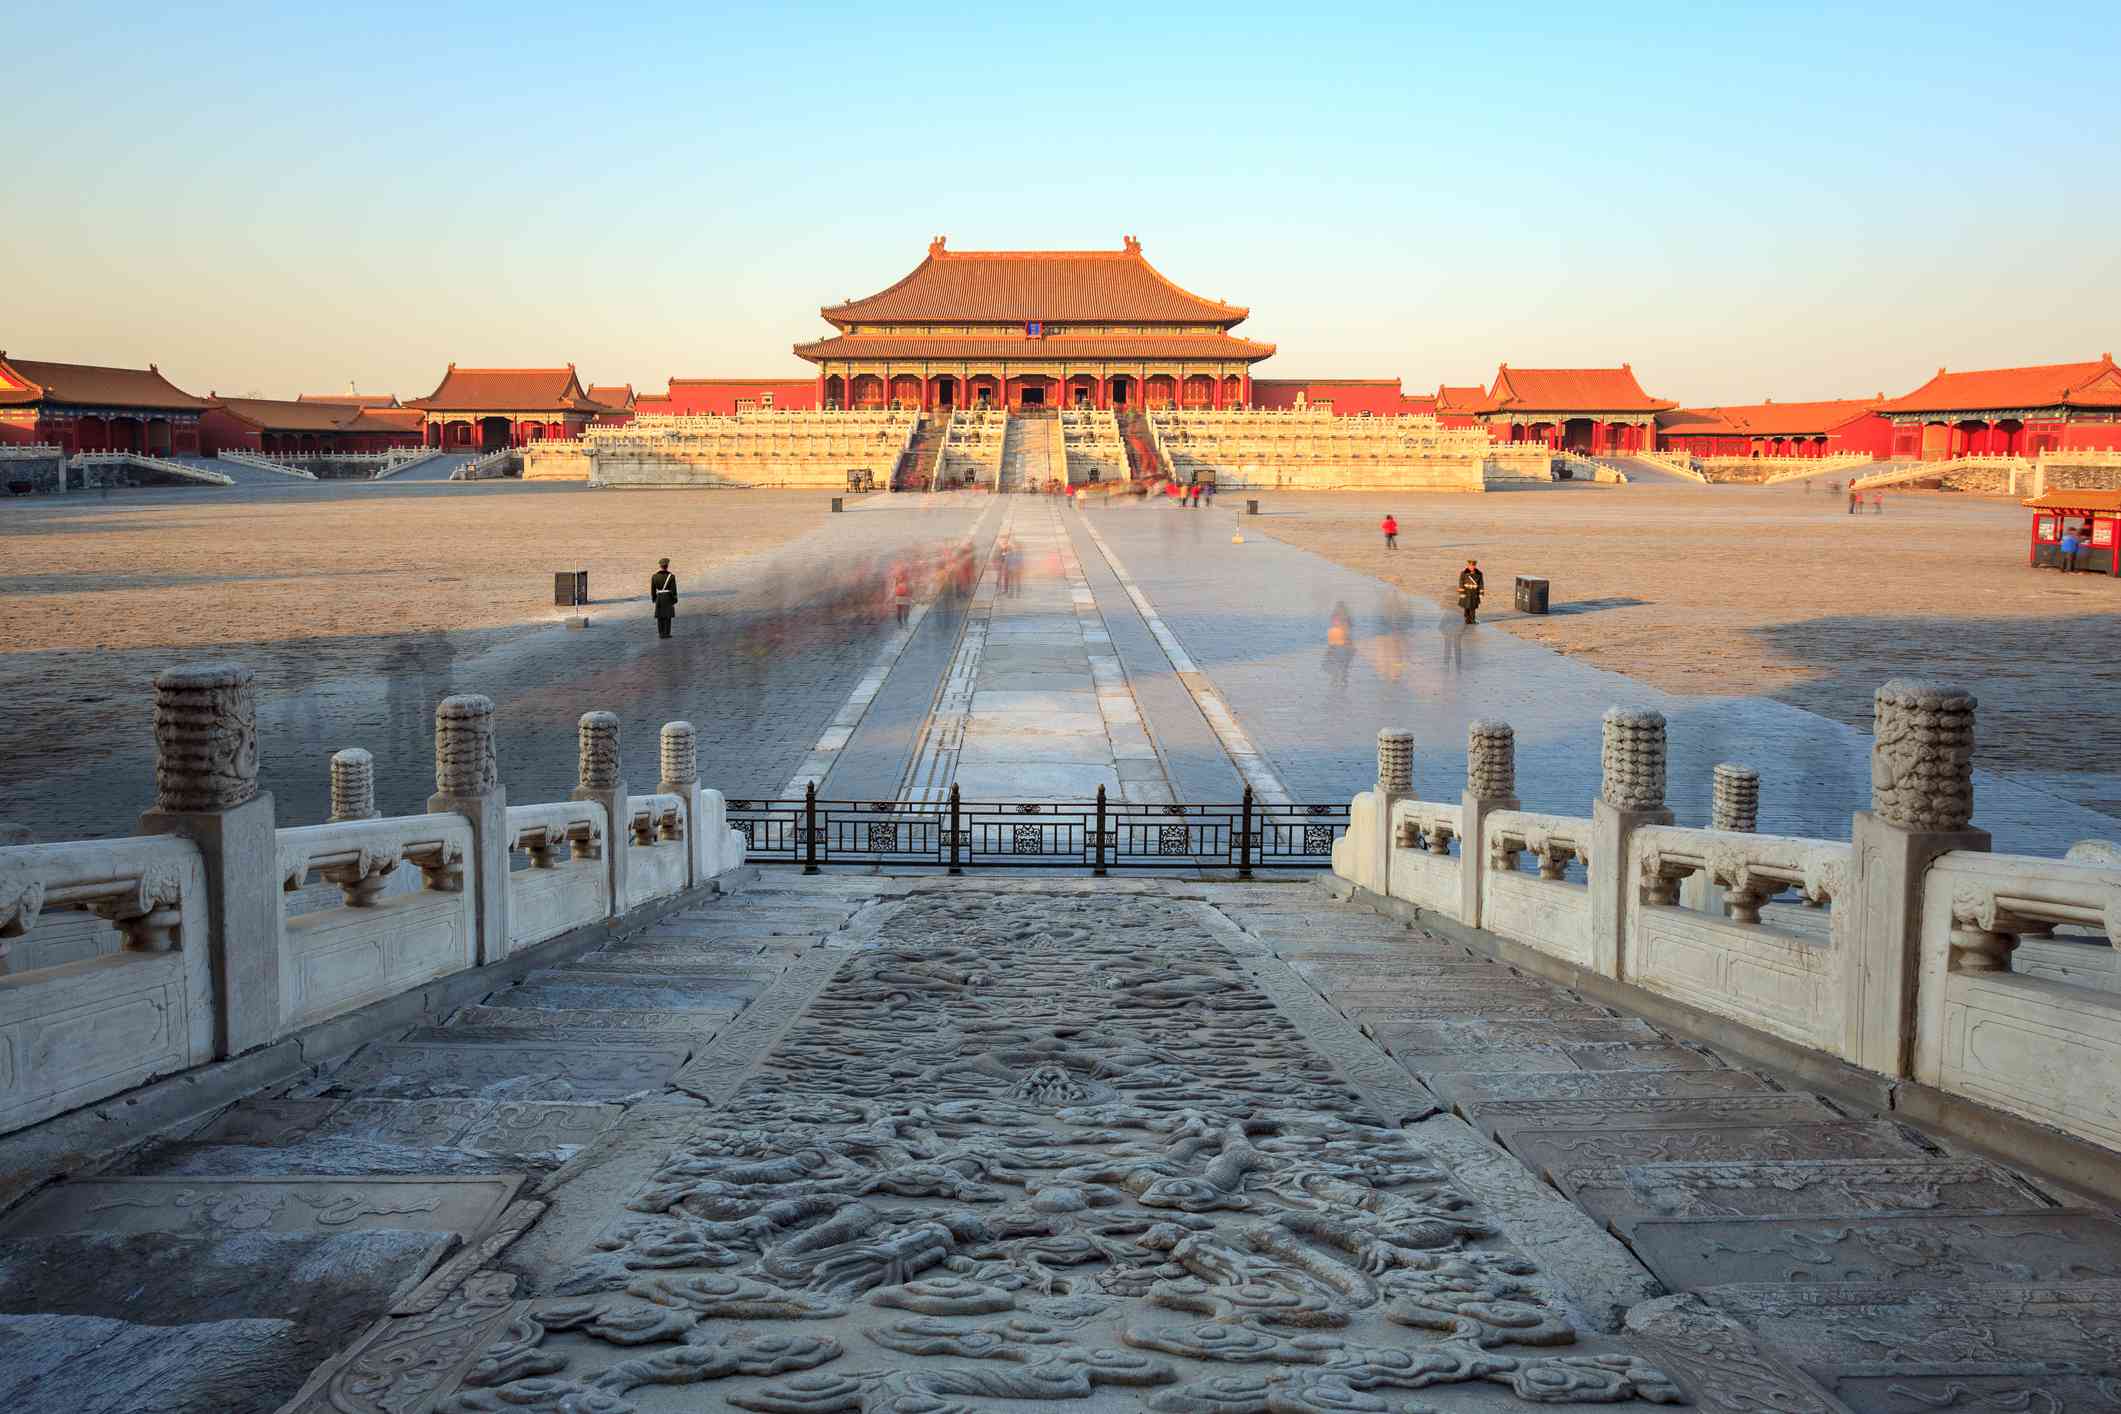 If We Give You a Hint, Can You Name the Most Populated Cities in the World? Chinese Temple And Forbidden City In A Day 636217080 F9f58e9618db4409b22733fcf9591901